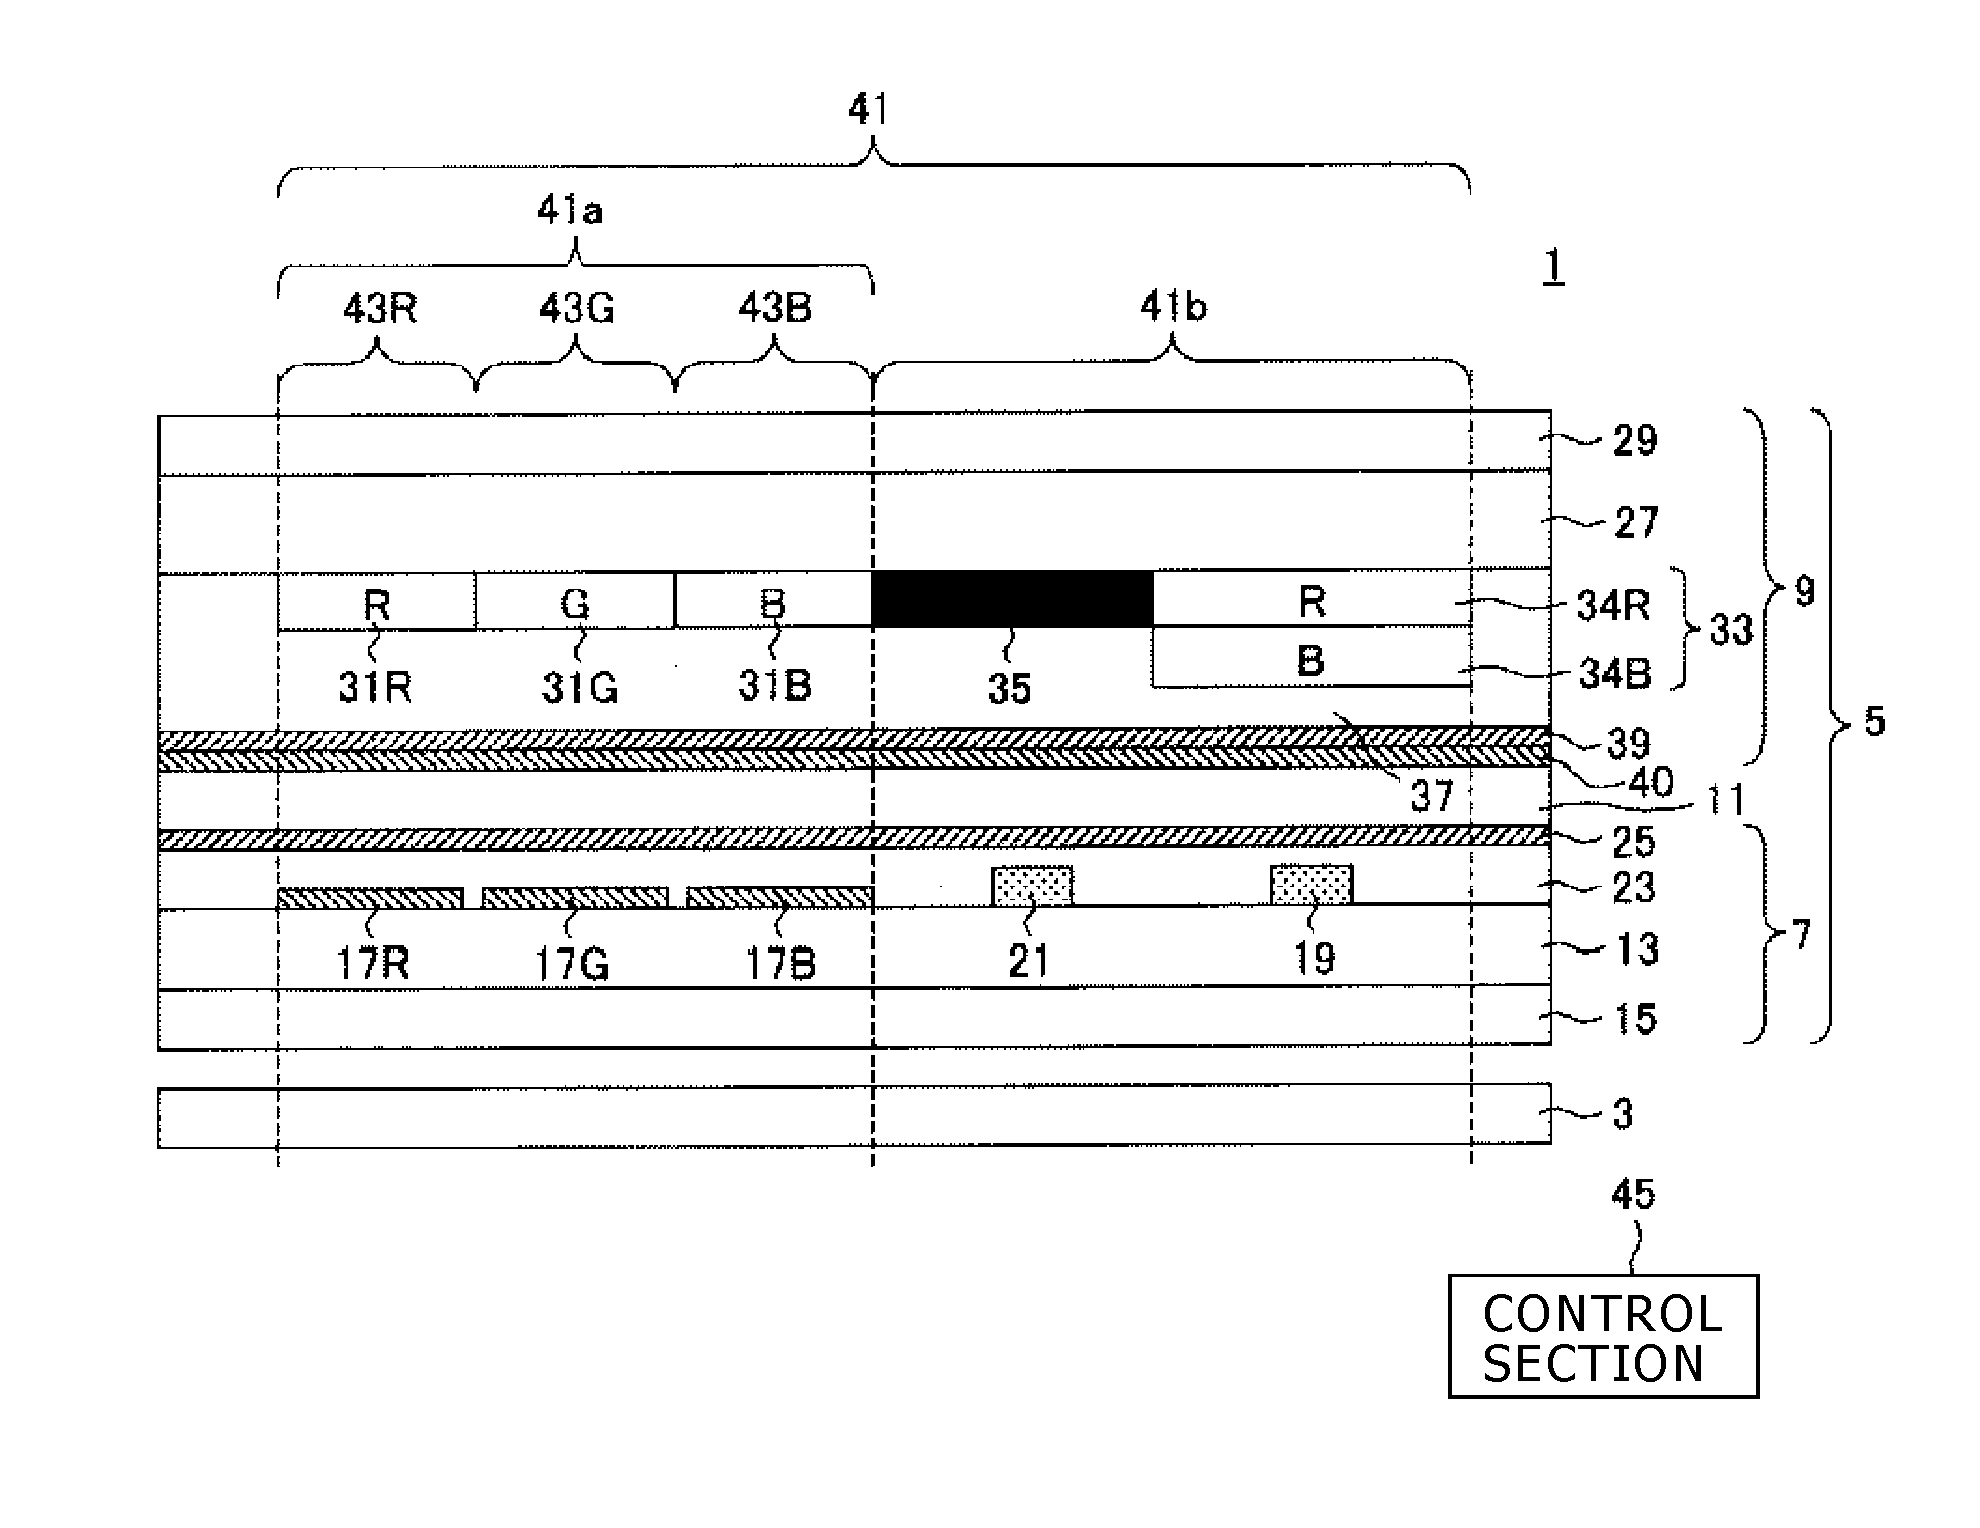 Display apparatus and fabrication method for display apparatus